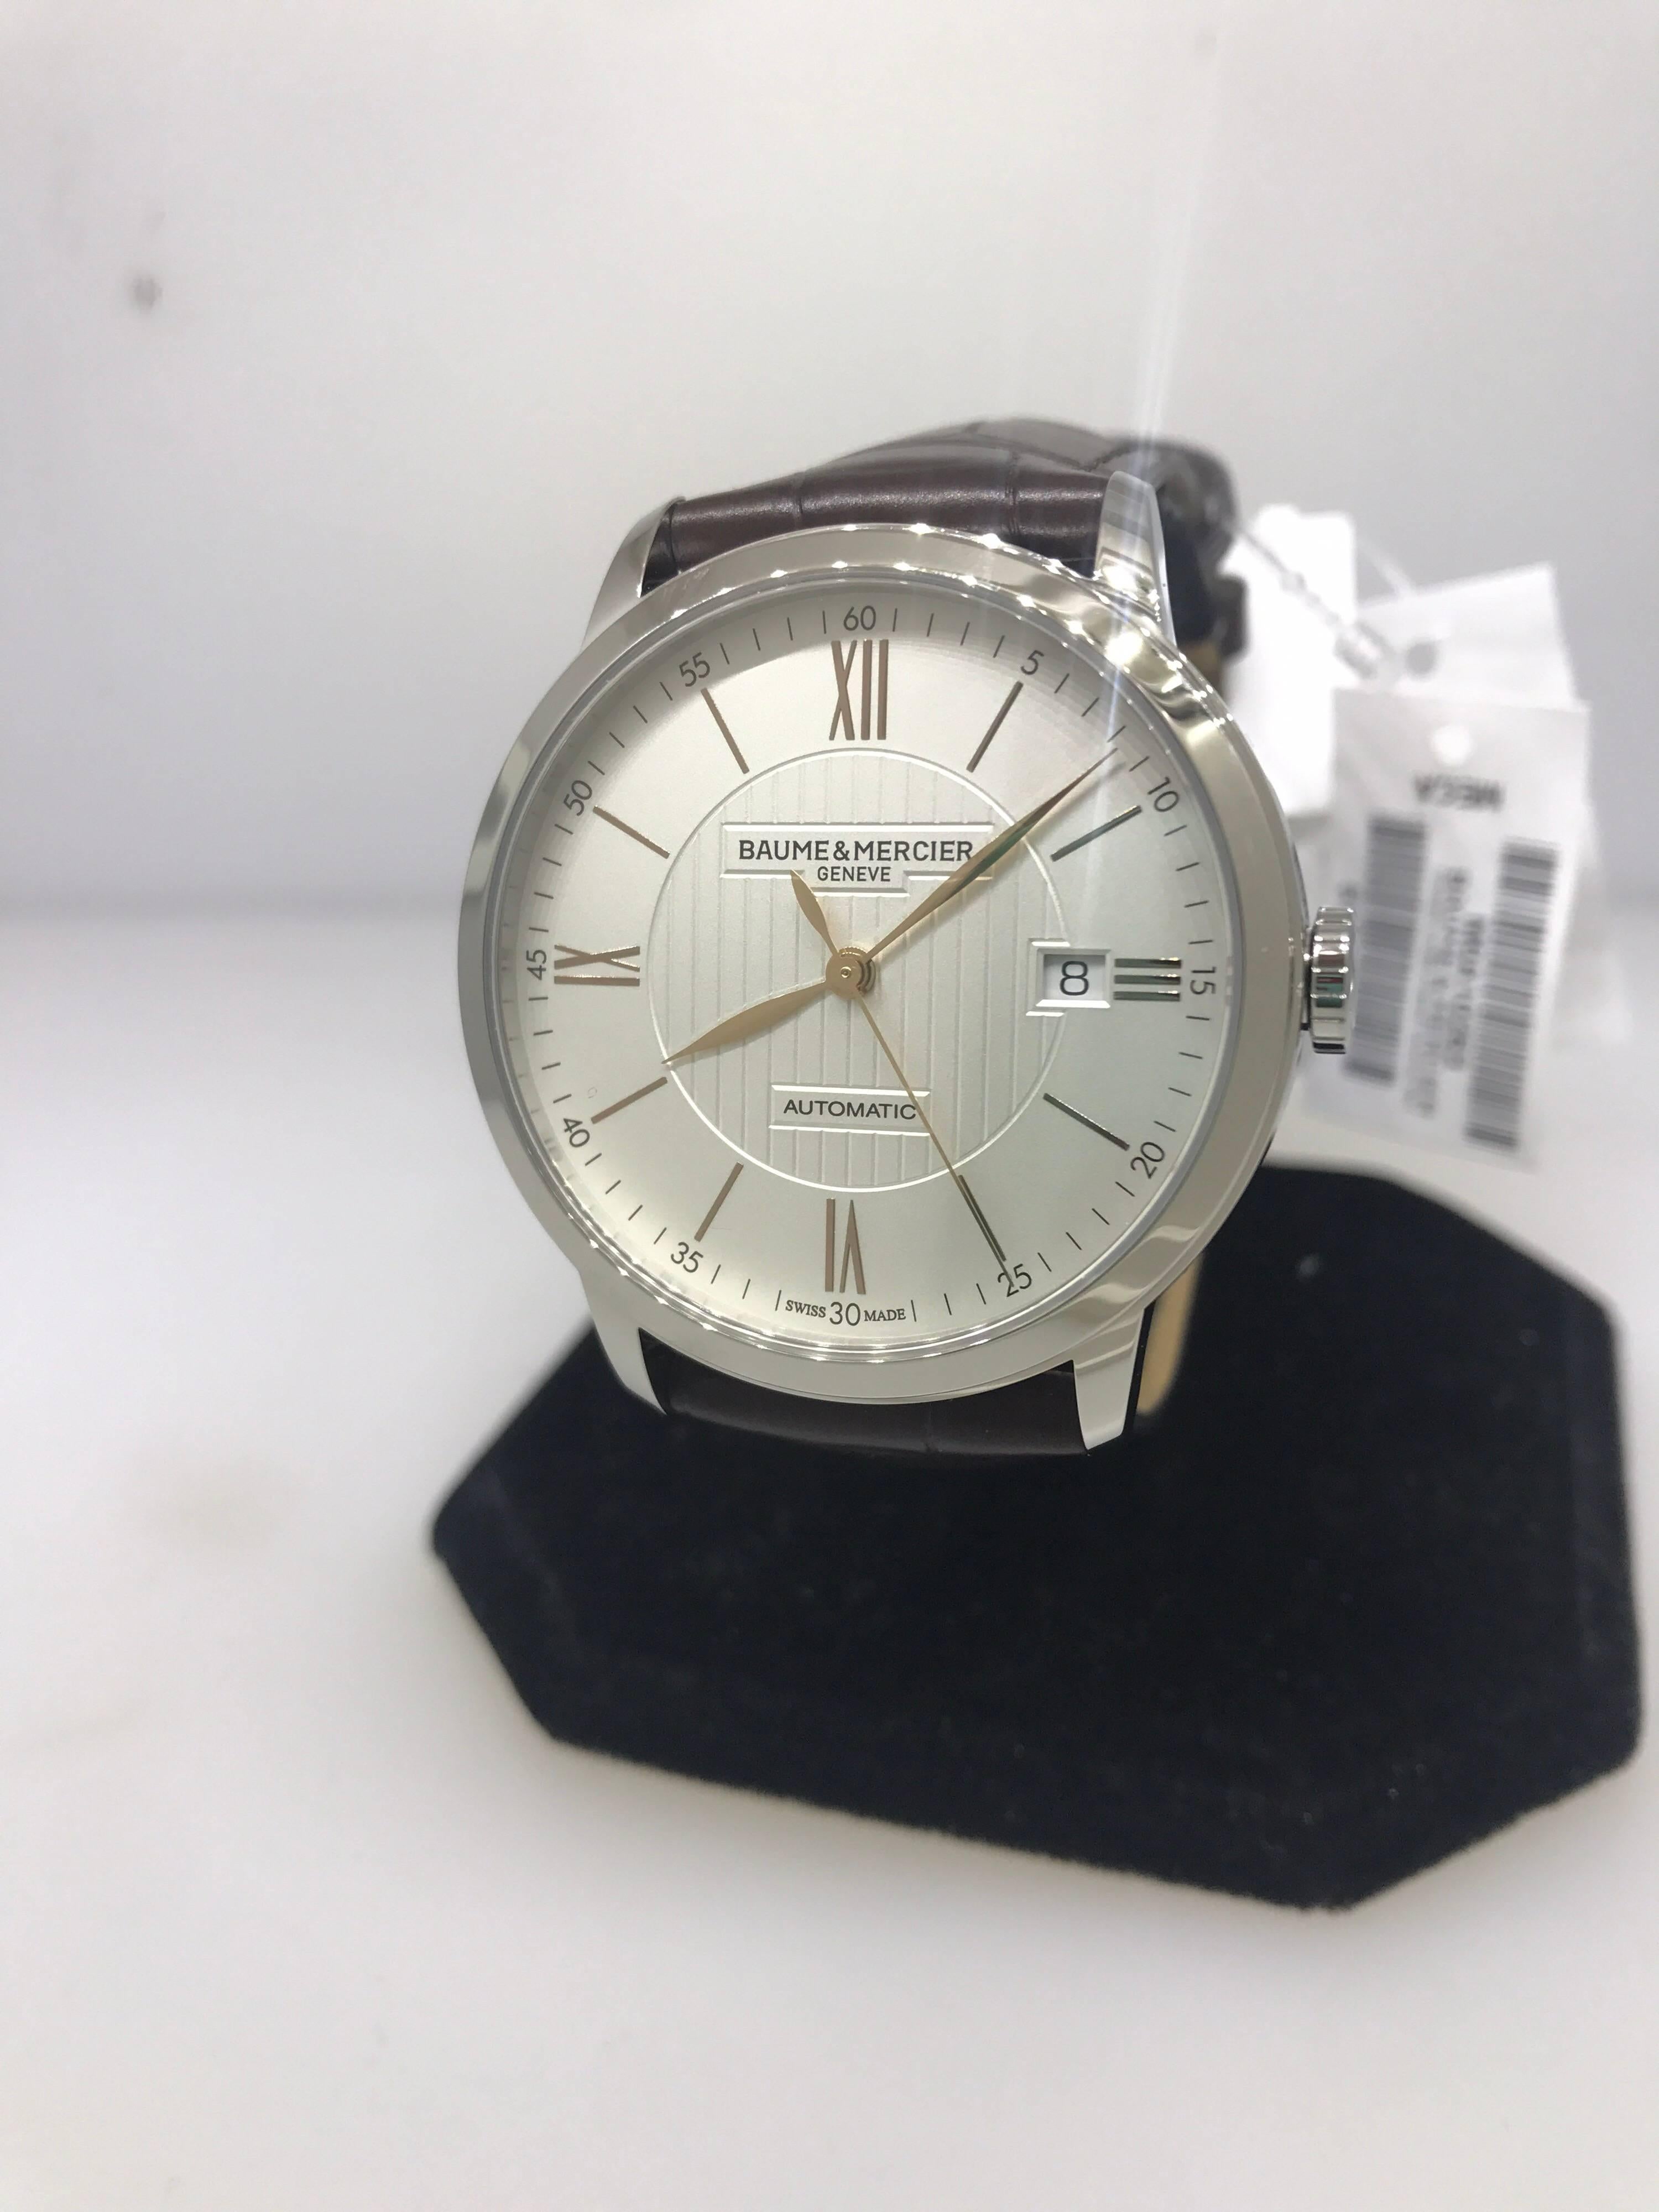 Baume & Mercier Classima Men's Watch

Model Number: M0A10263

Brand New

Comes with original Baume & Mercier box, warranty card, and insruction manual

Stainless Steel Case & Buckle

Silver Dial

Rose Gold Tone Roman Numeral & Index Hour